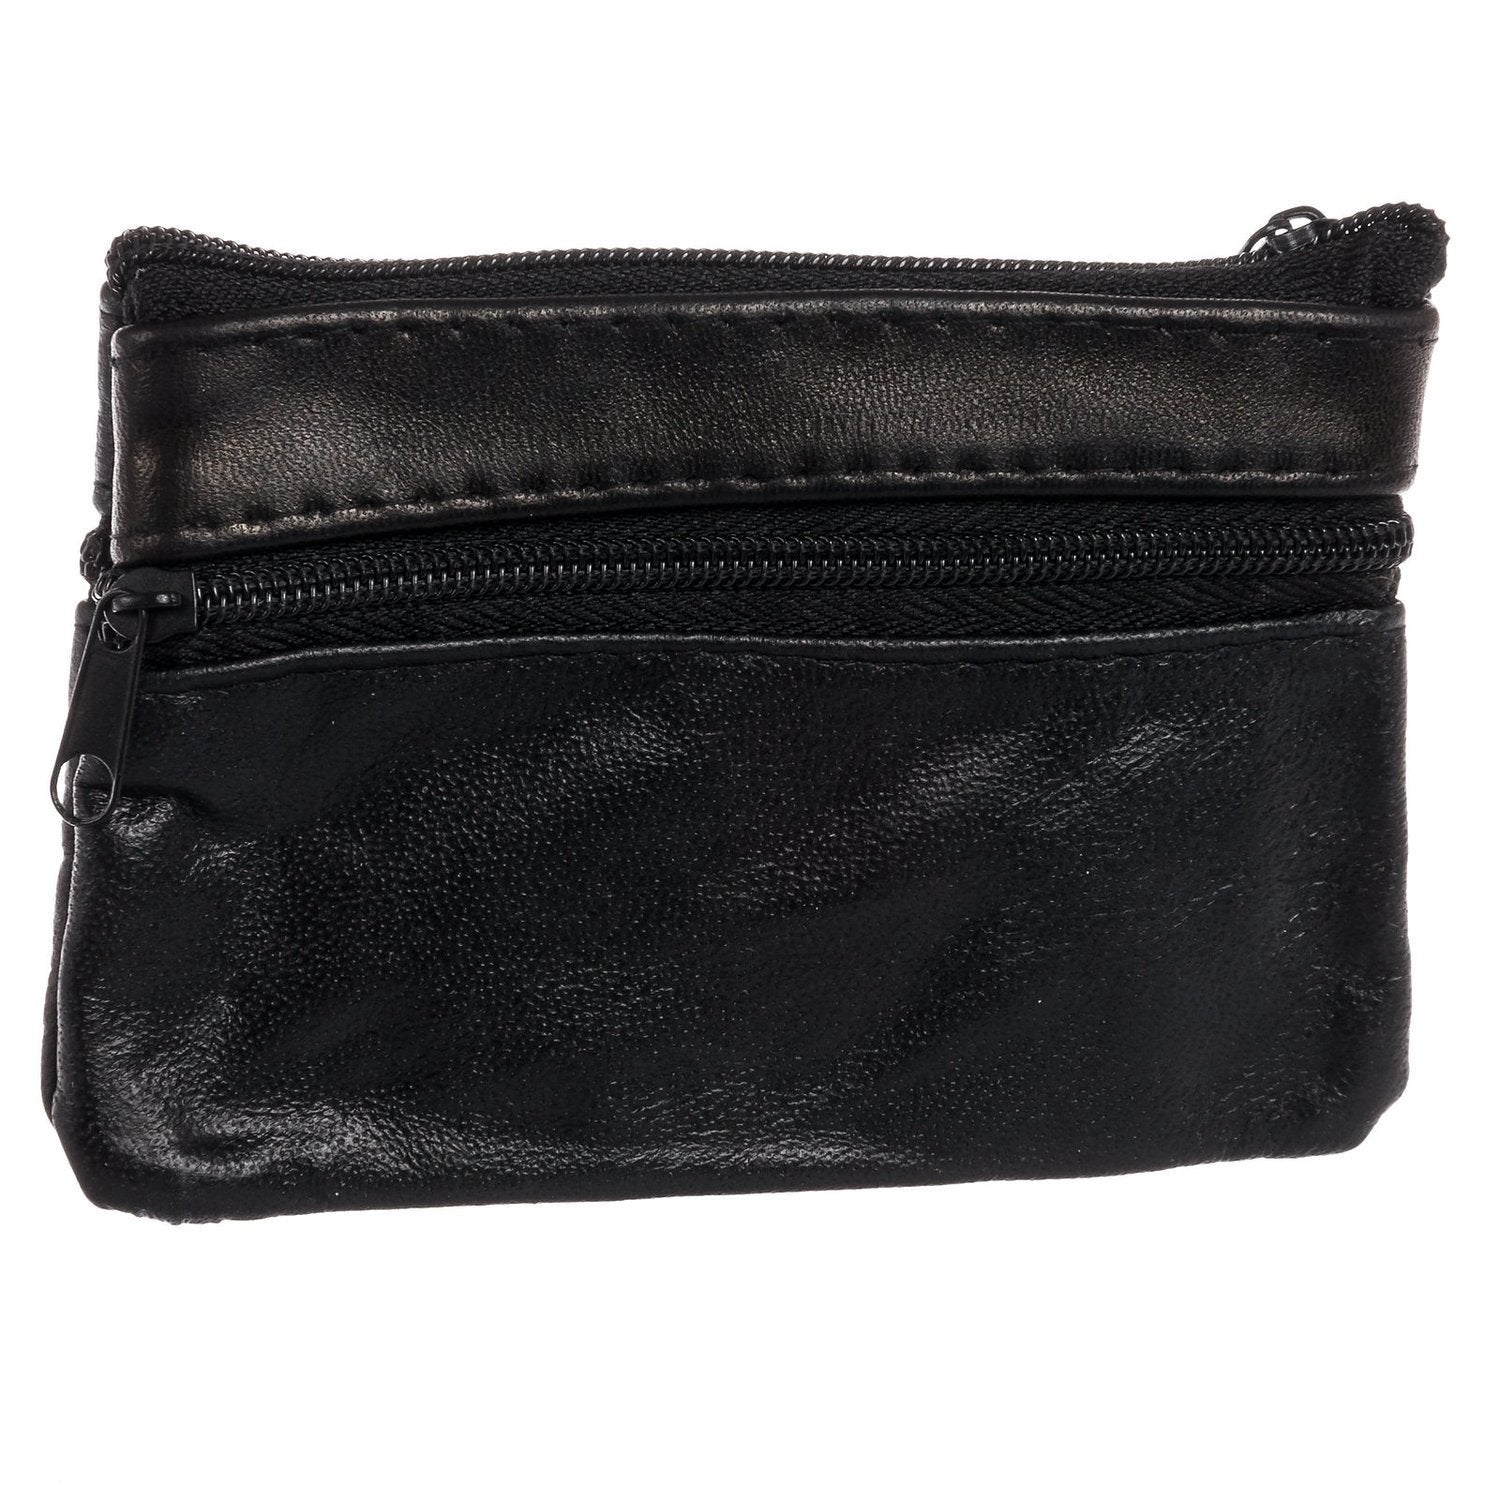 Leather Change Purse with Key Ring